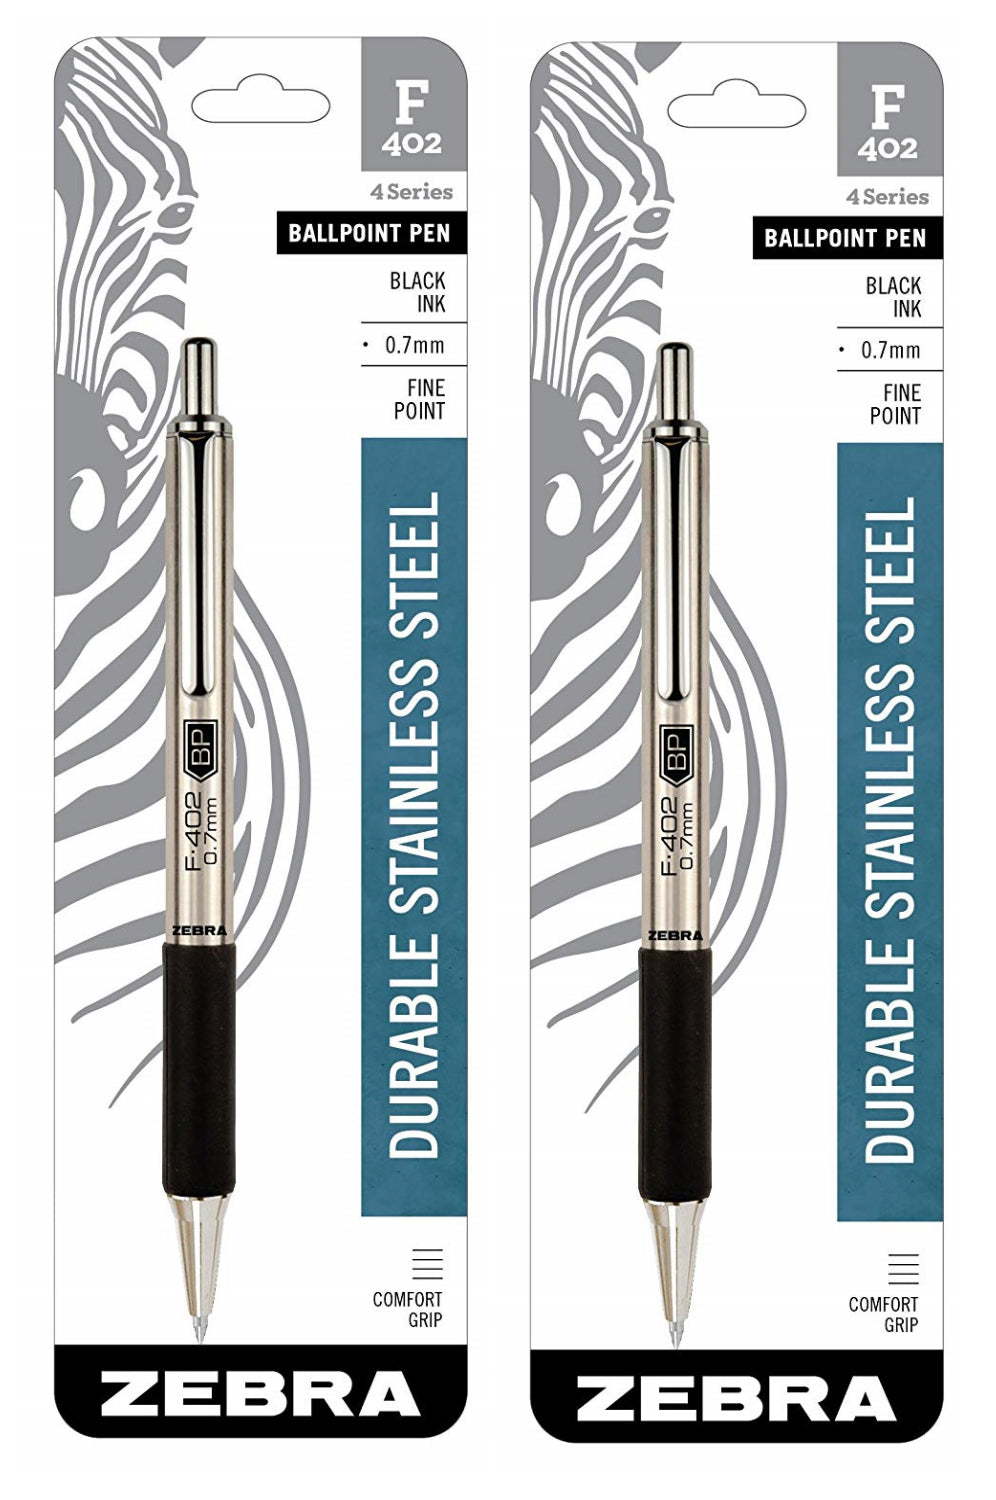 F-402 Ballpoint Stainless Steel Retractable Pen, 2 pcs Fine Point, 0.7mm, Black Ink - Pack of 2